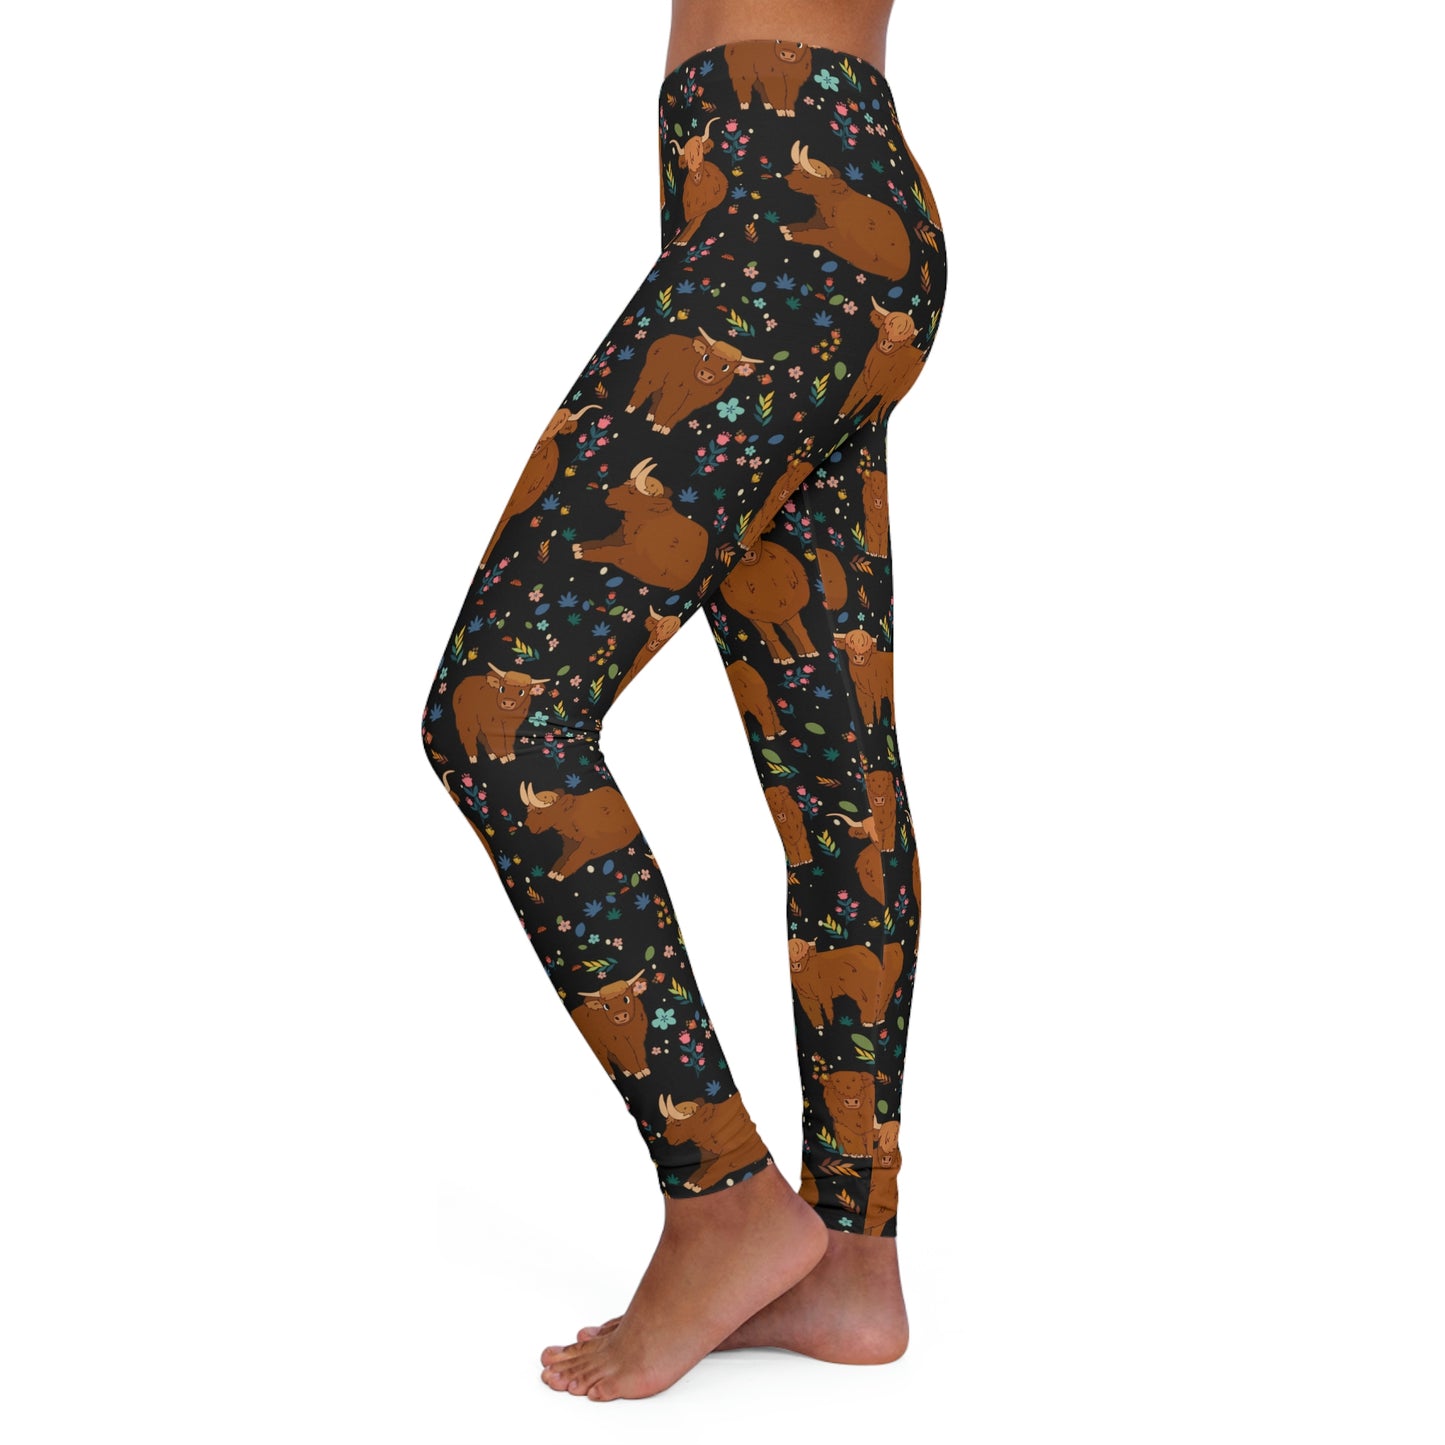 Highland cows Women Leggings, animal kingdom, One of a Kind Workout Activewear for Wife Fitness, Girlfriend mom and me tights Christmas Gift